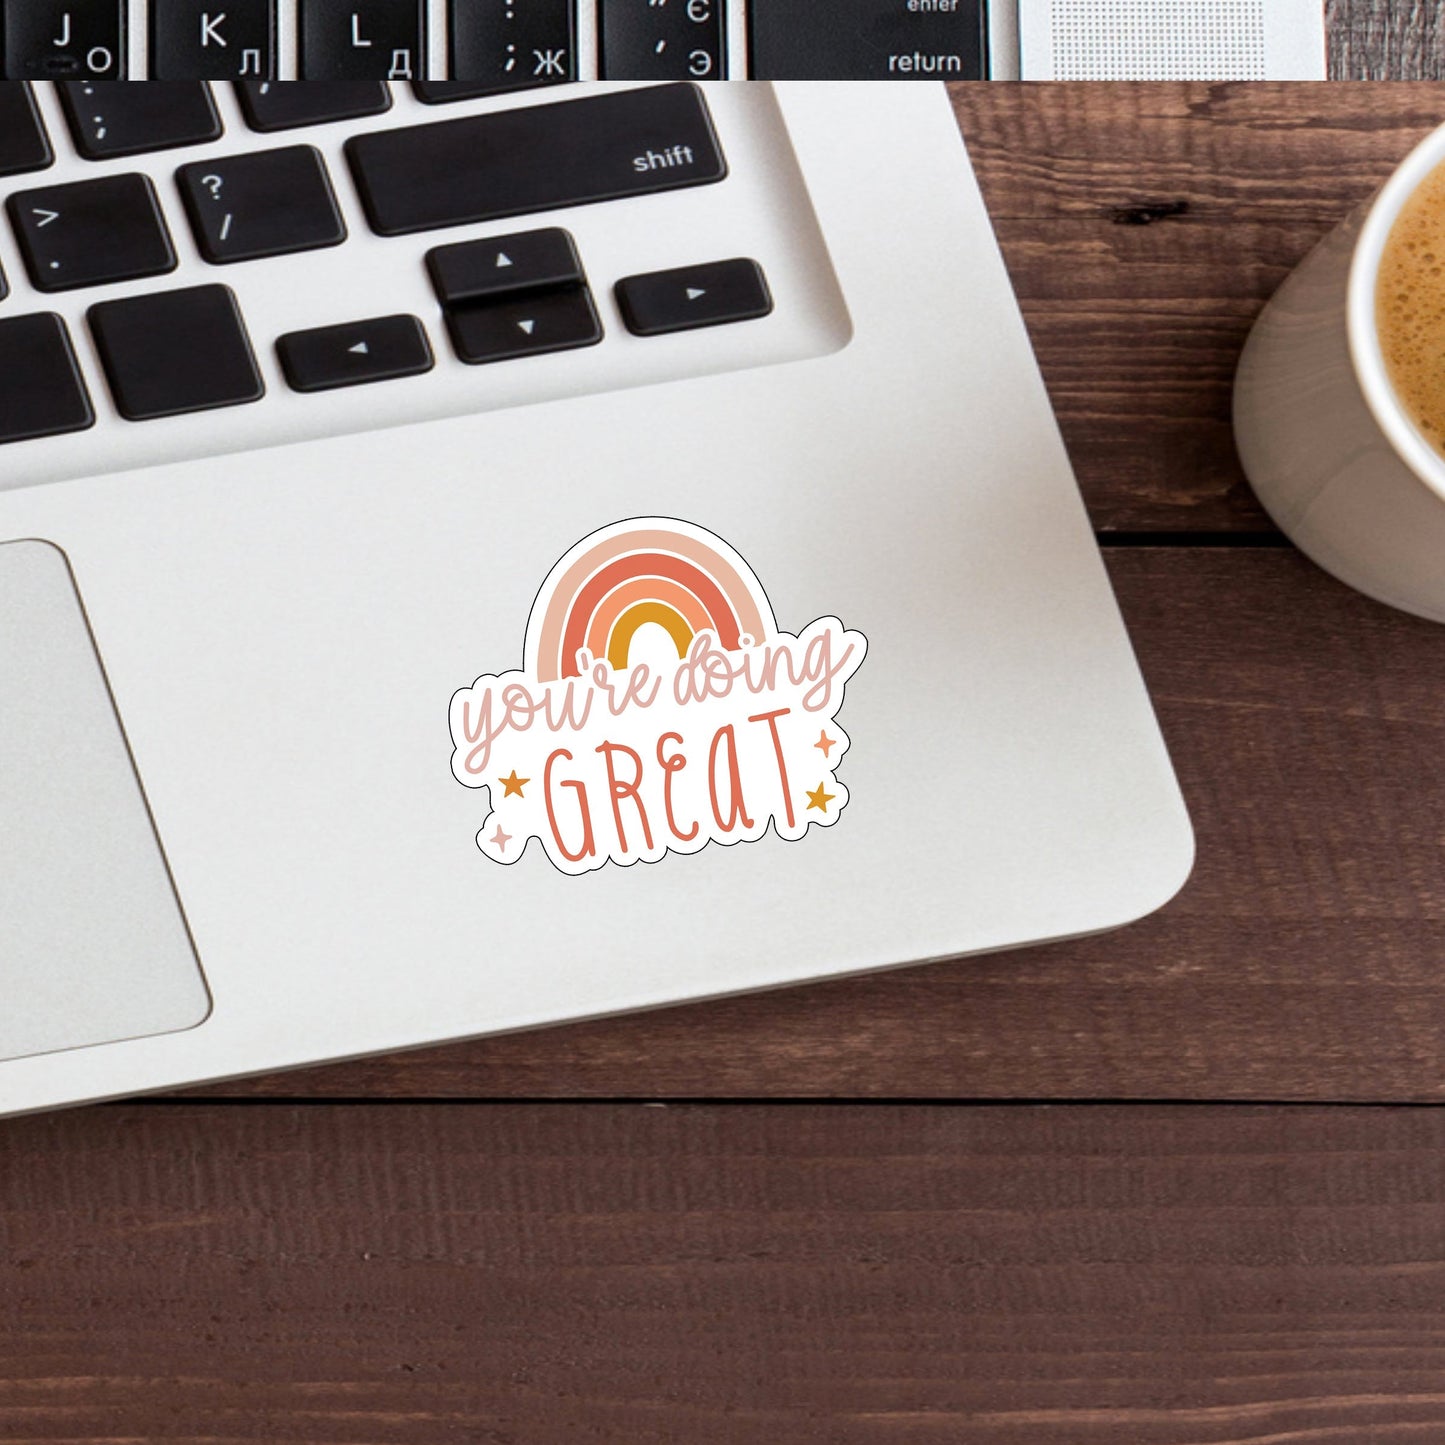 You're Doing Great Sticker, Express Yourself with our Unique Vinyl Stickers for Laptops, Tablets, and More!